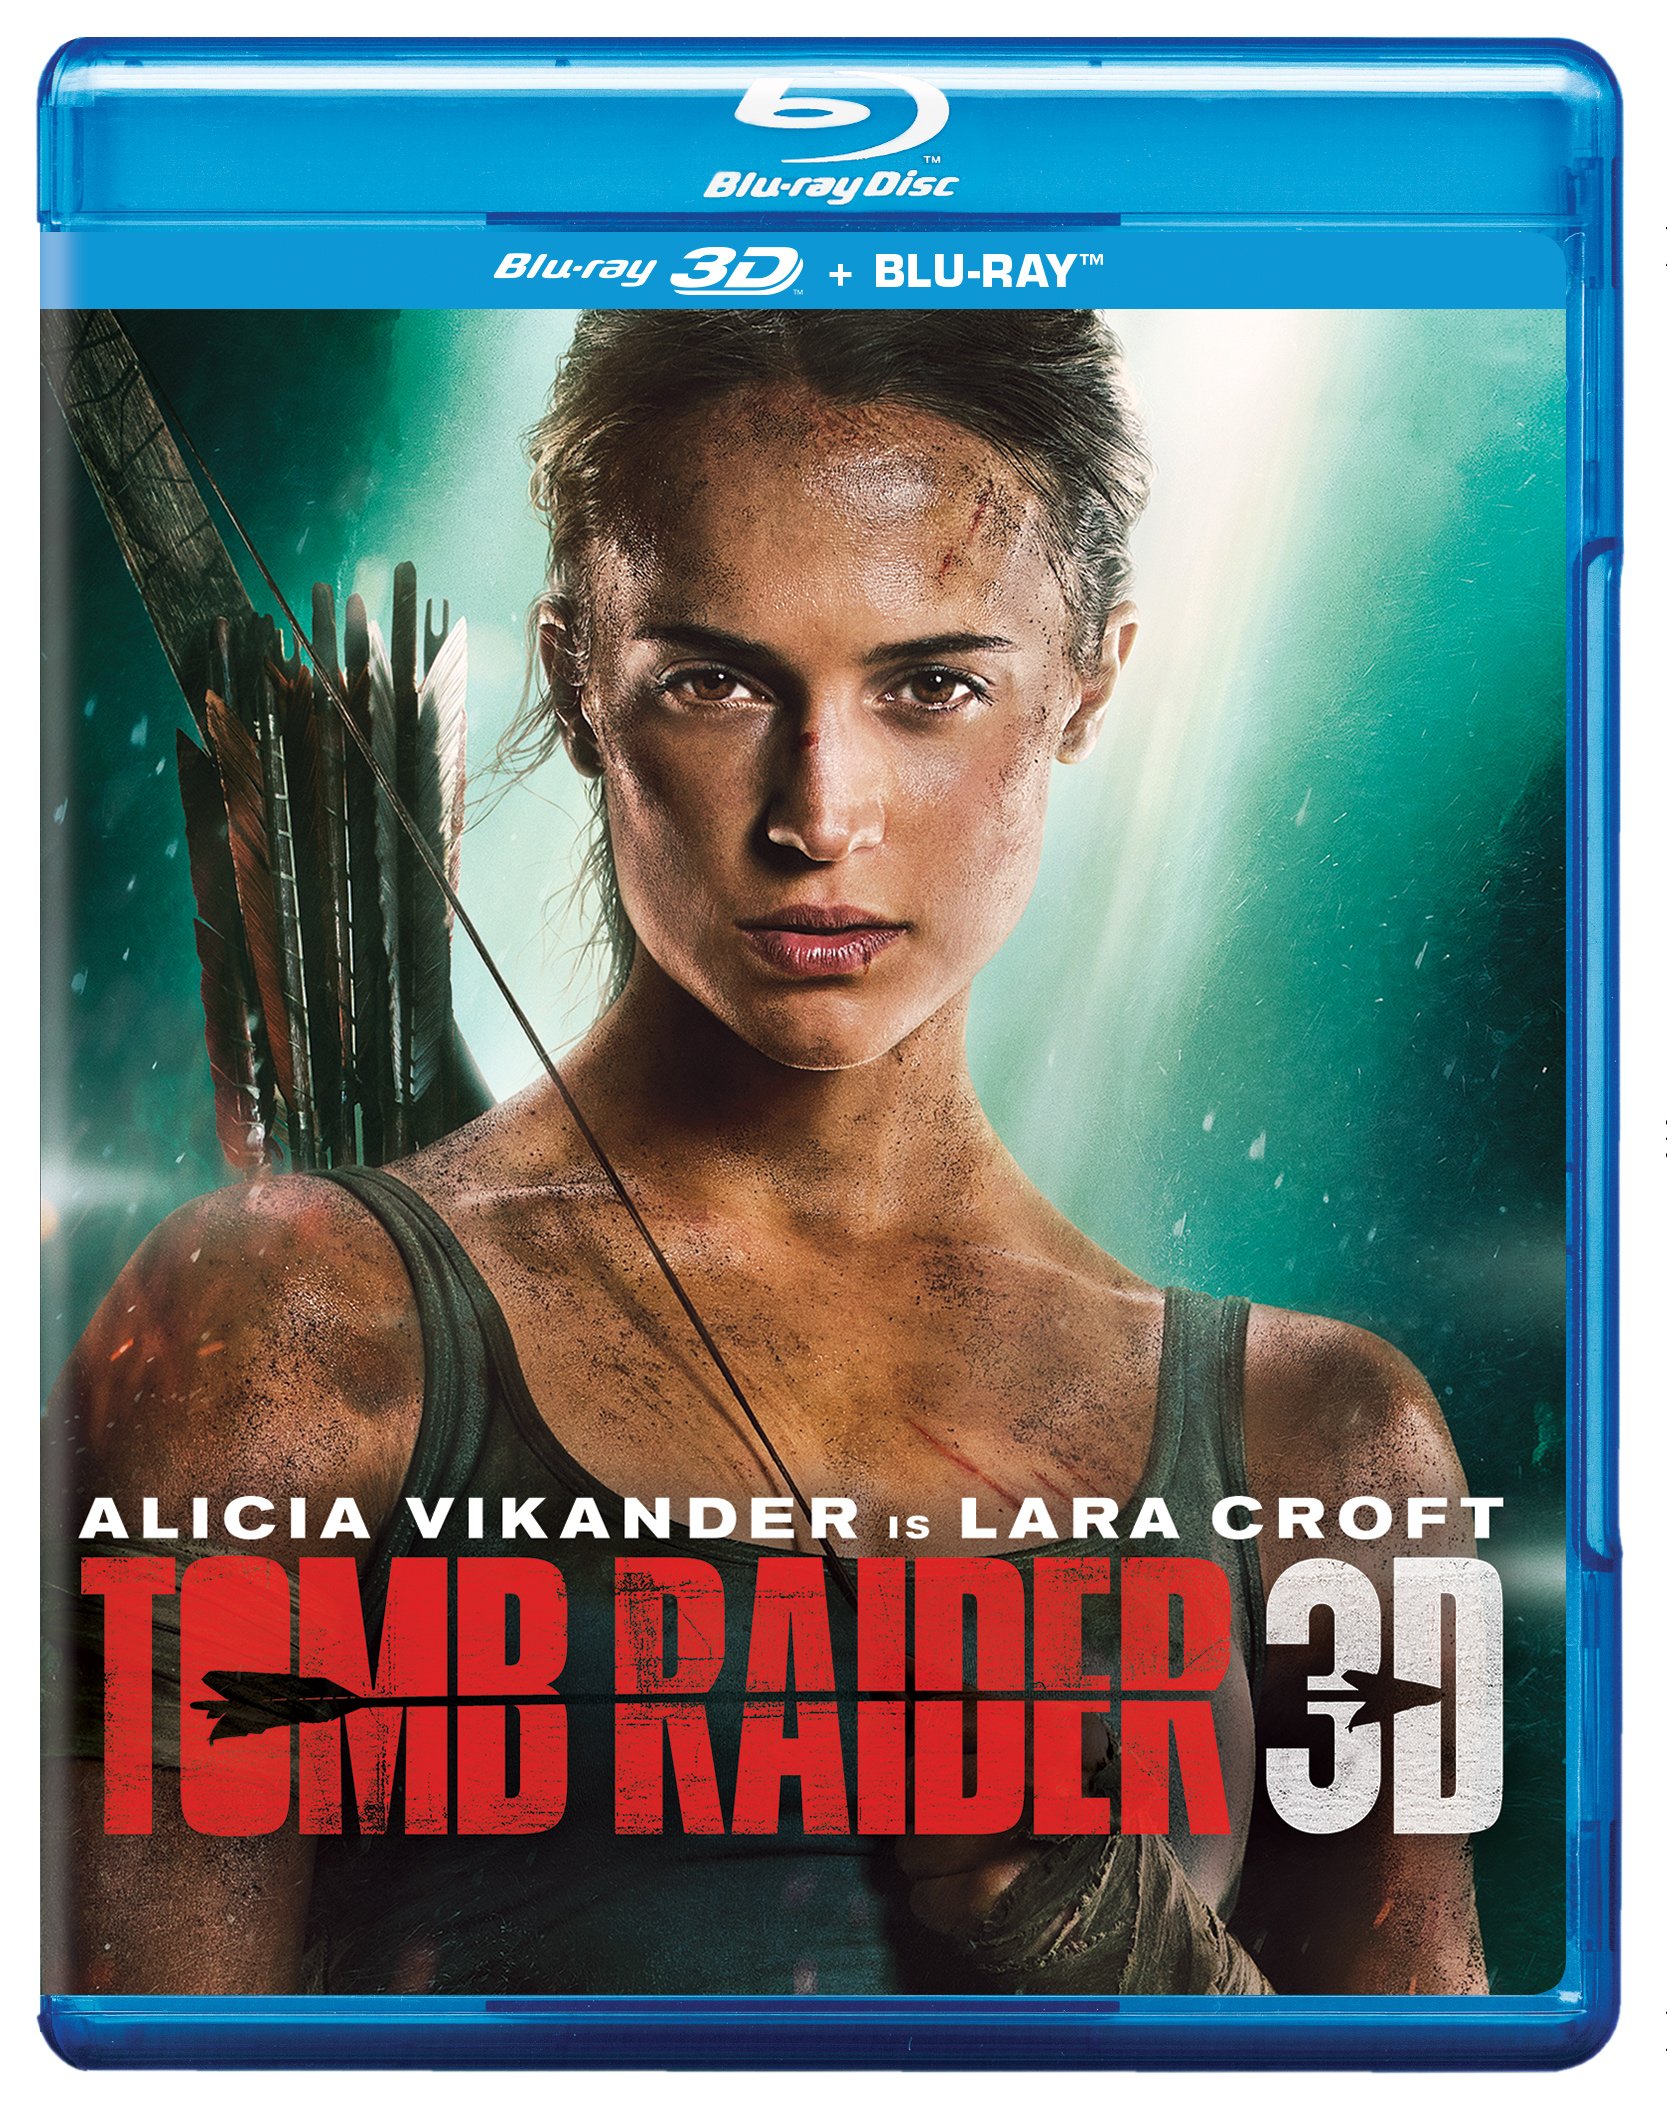 tomb-raider-blu-ray-3d-blu-ray-2-disc-movie-purchase-or-watch-on